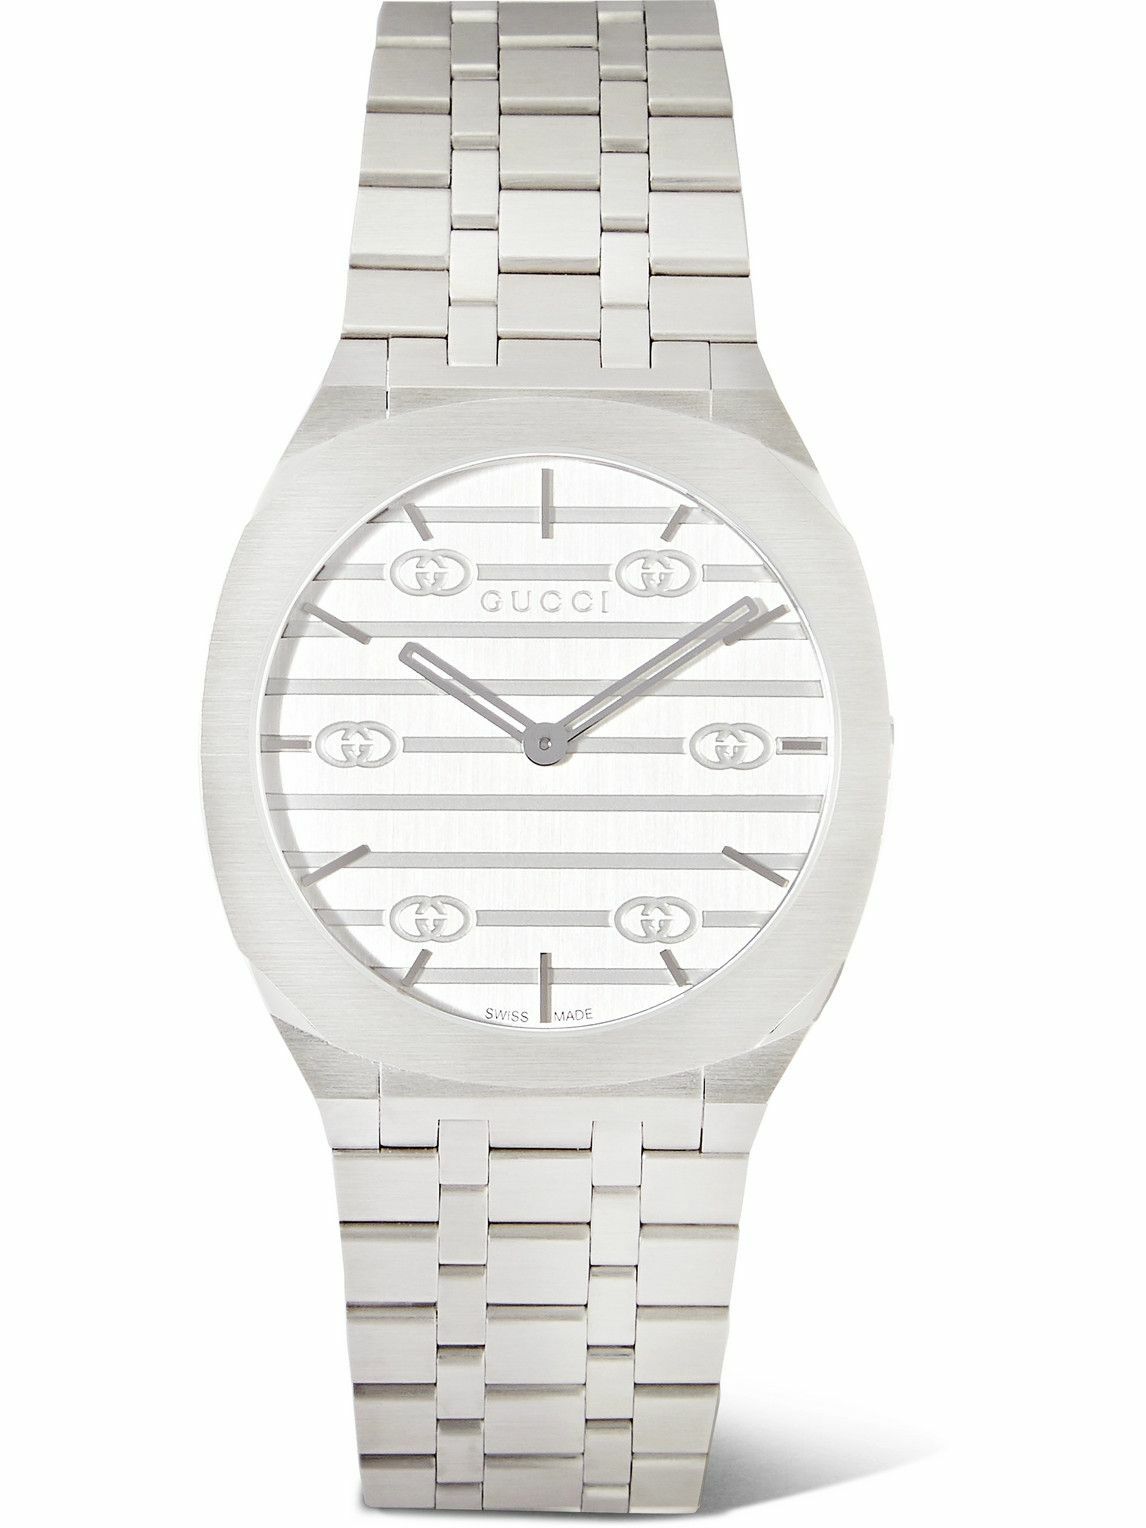 GUCCI - 25h 34mm Stainless Steel Watch Gucci